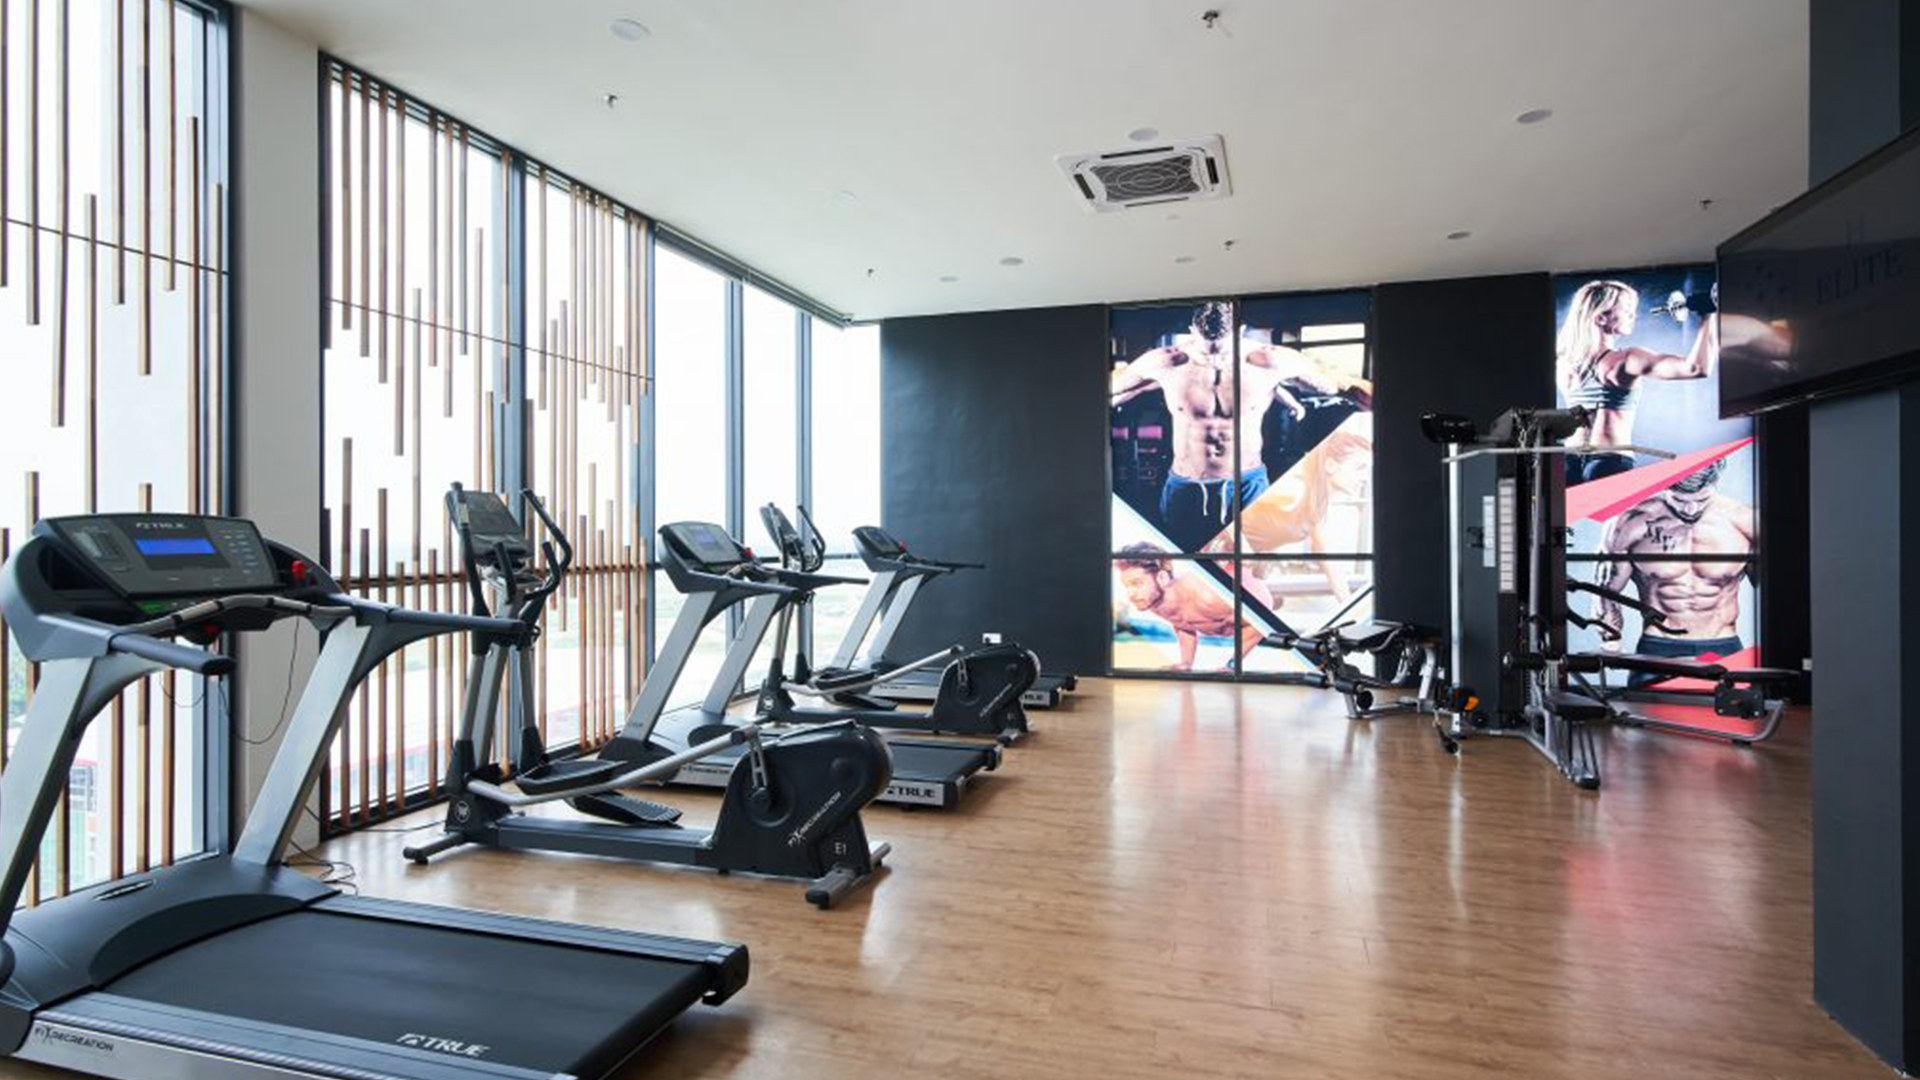 Benefits of a corporate gym in the workplace